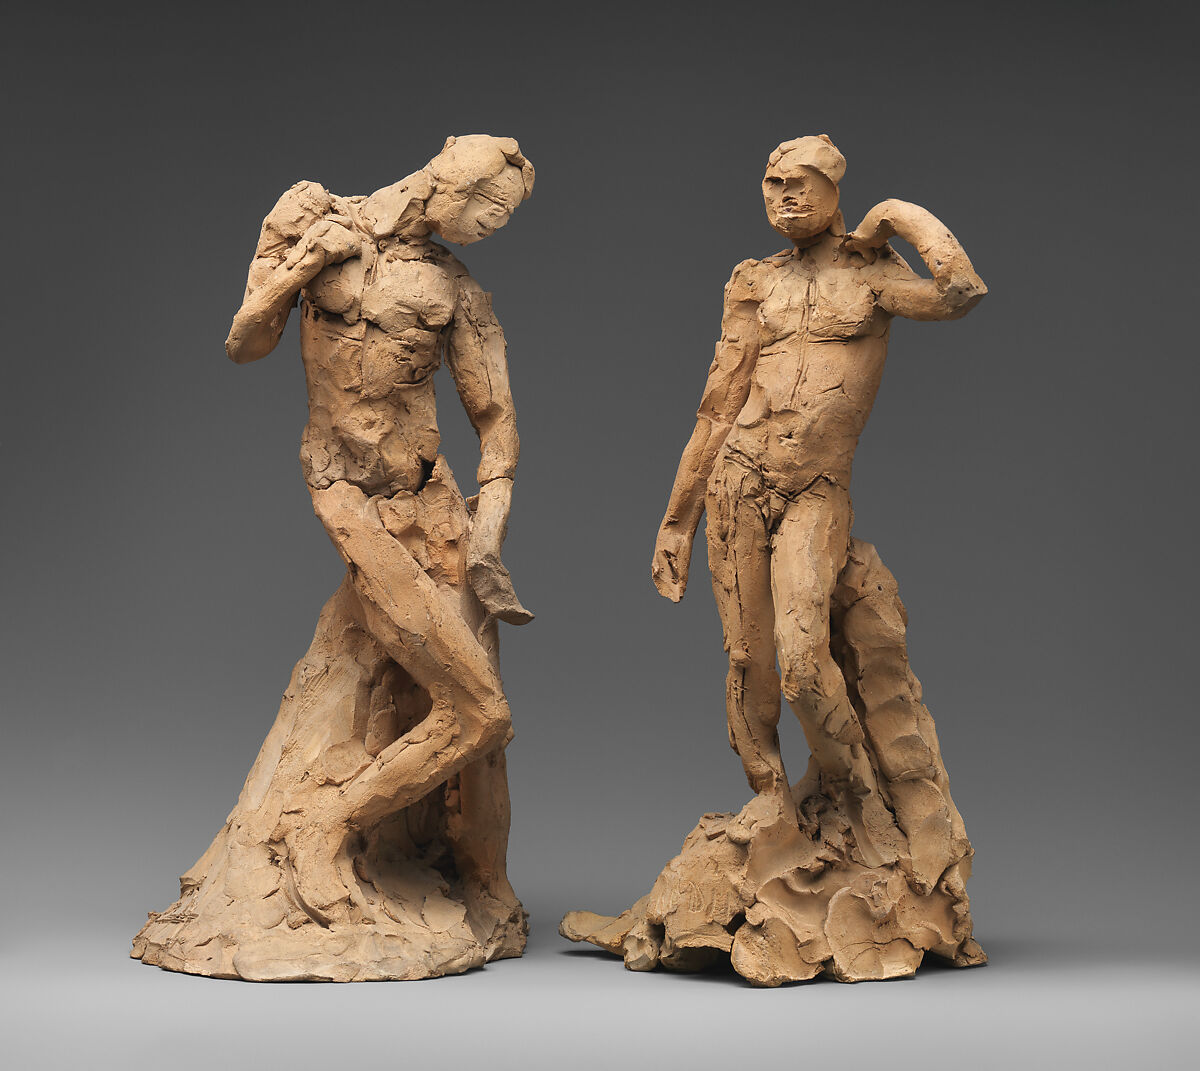 Pair of Standing Nude Male Figures Demonstrating the Principles of Contrapposto according to Michelangelo and Phidias, Auguste Rodin (French, Paris 1840–1917 Meudon), Terracotta, French 